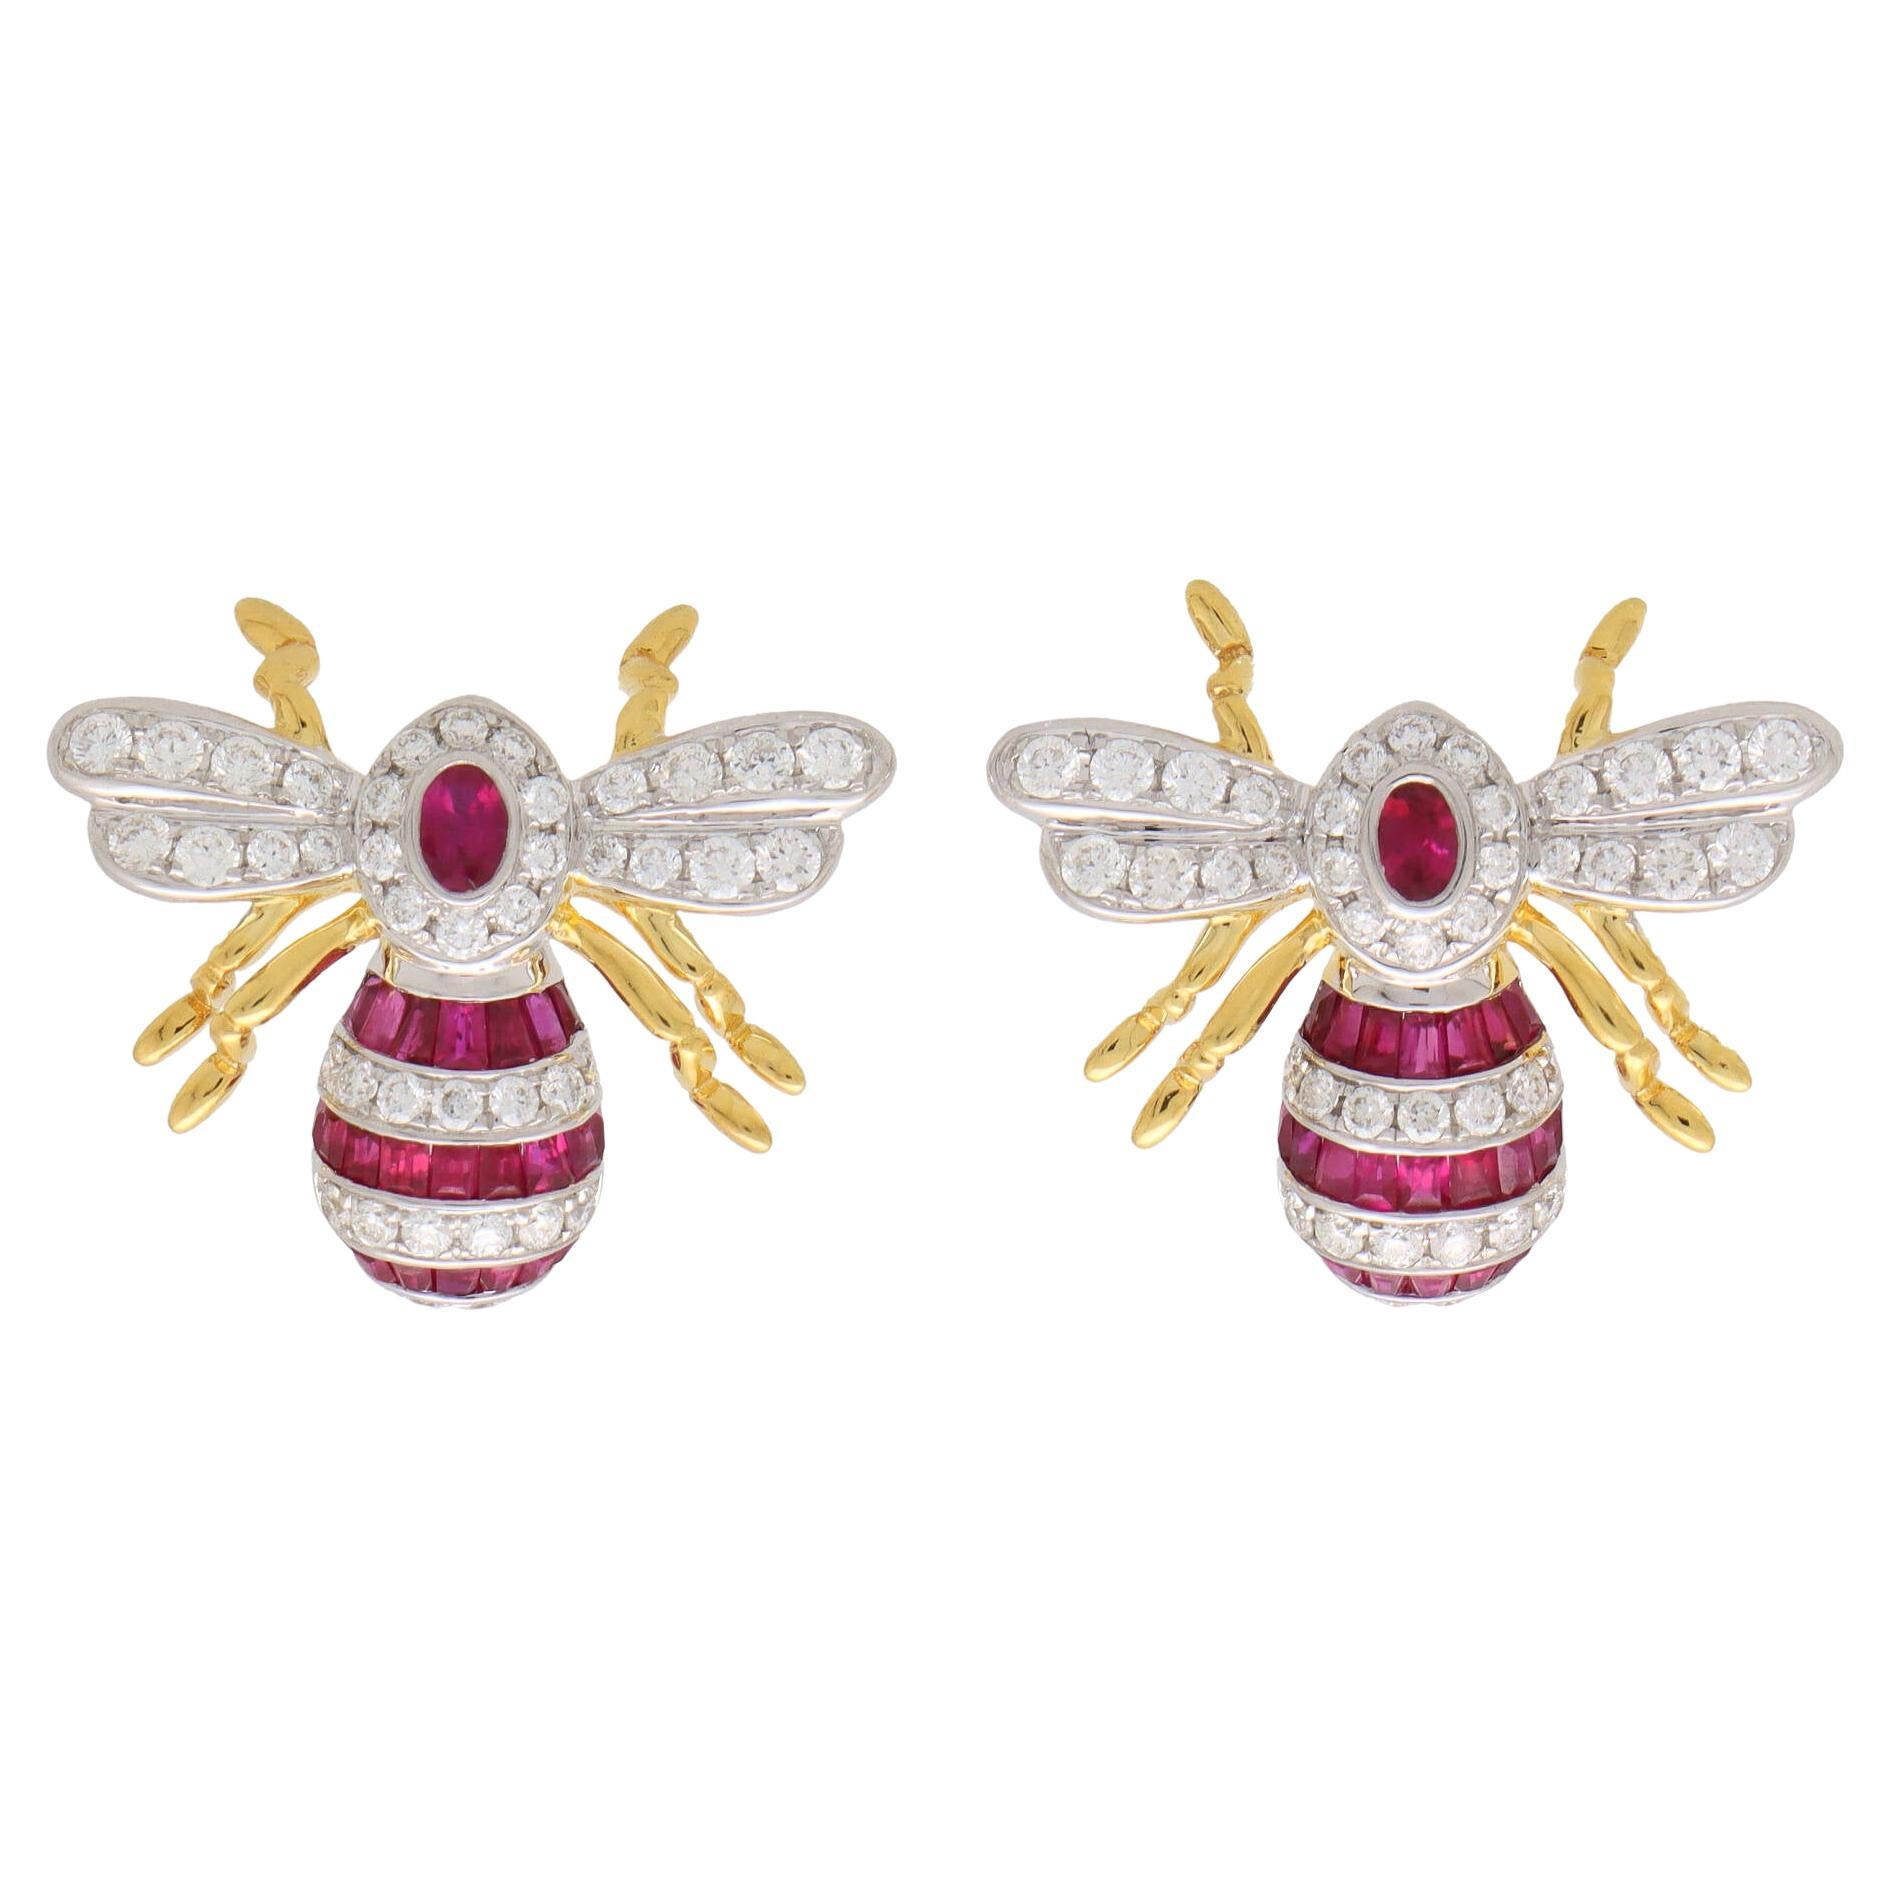 Ruby and Diamond Bee Earring Set in 18k White and Yellow Gold